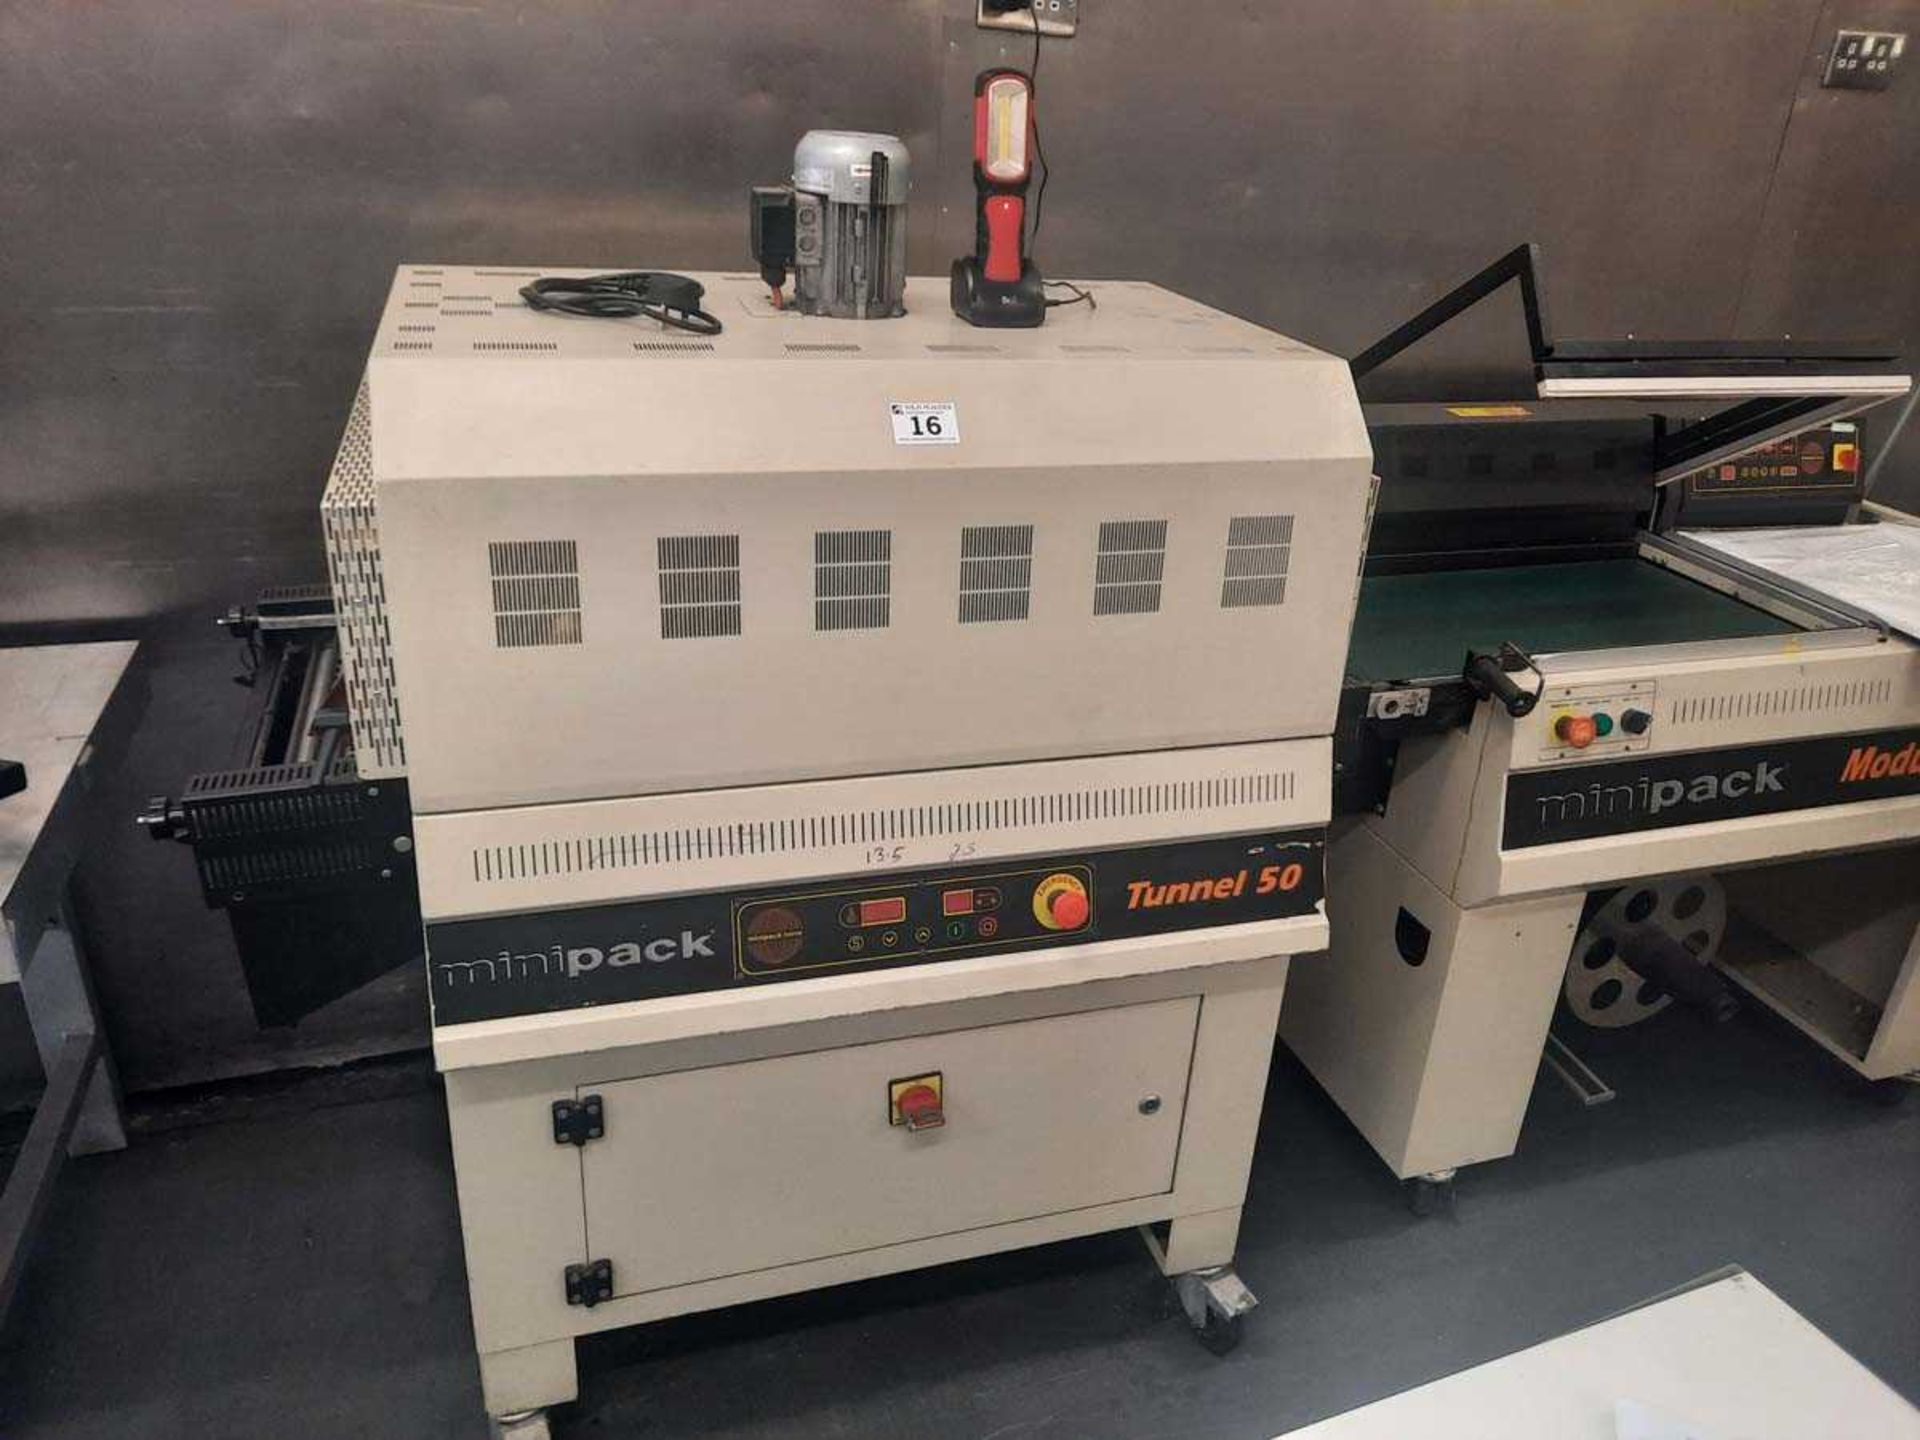 +VAT Minipack Modular 50SYear: 2010 heat sealer with Minipack Tunnel 50 Year: 2009 shrink wrapper,